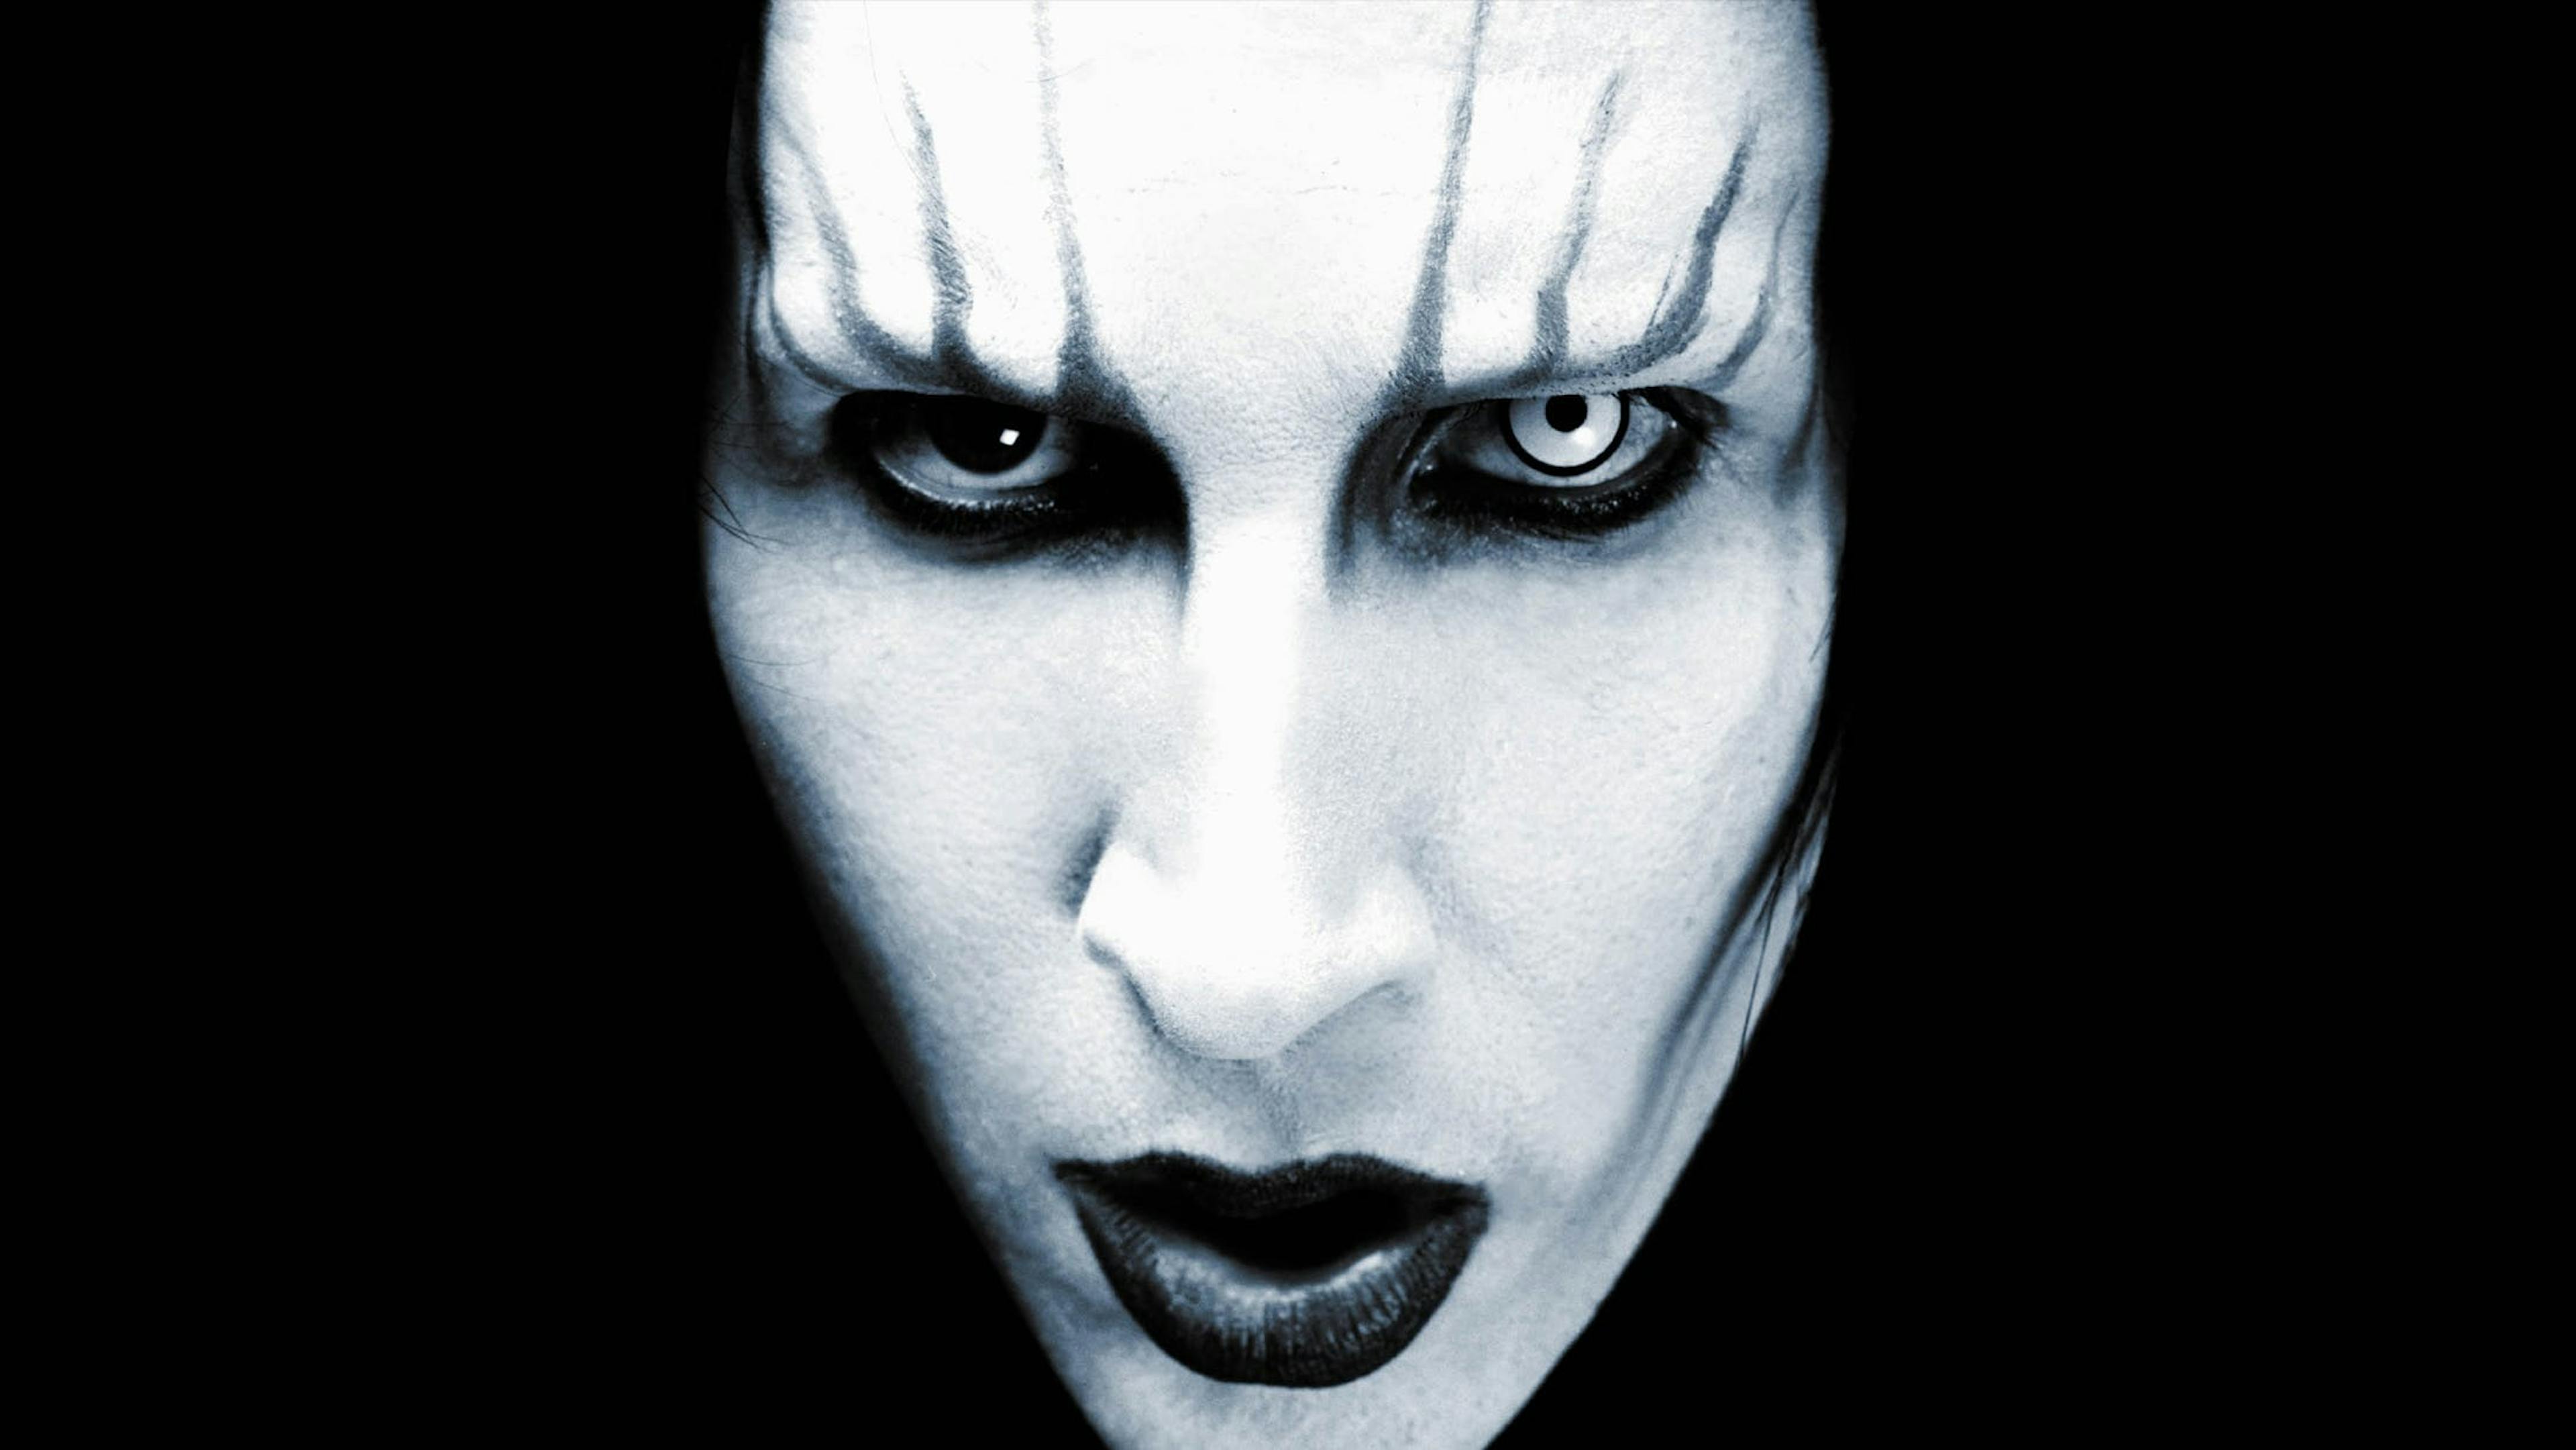 Marilyn Manson - Personal Life, Songs & Facts